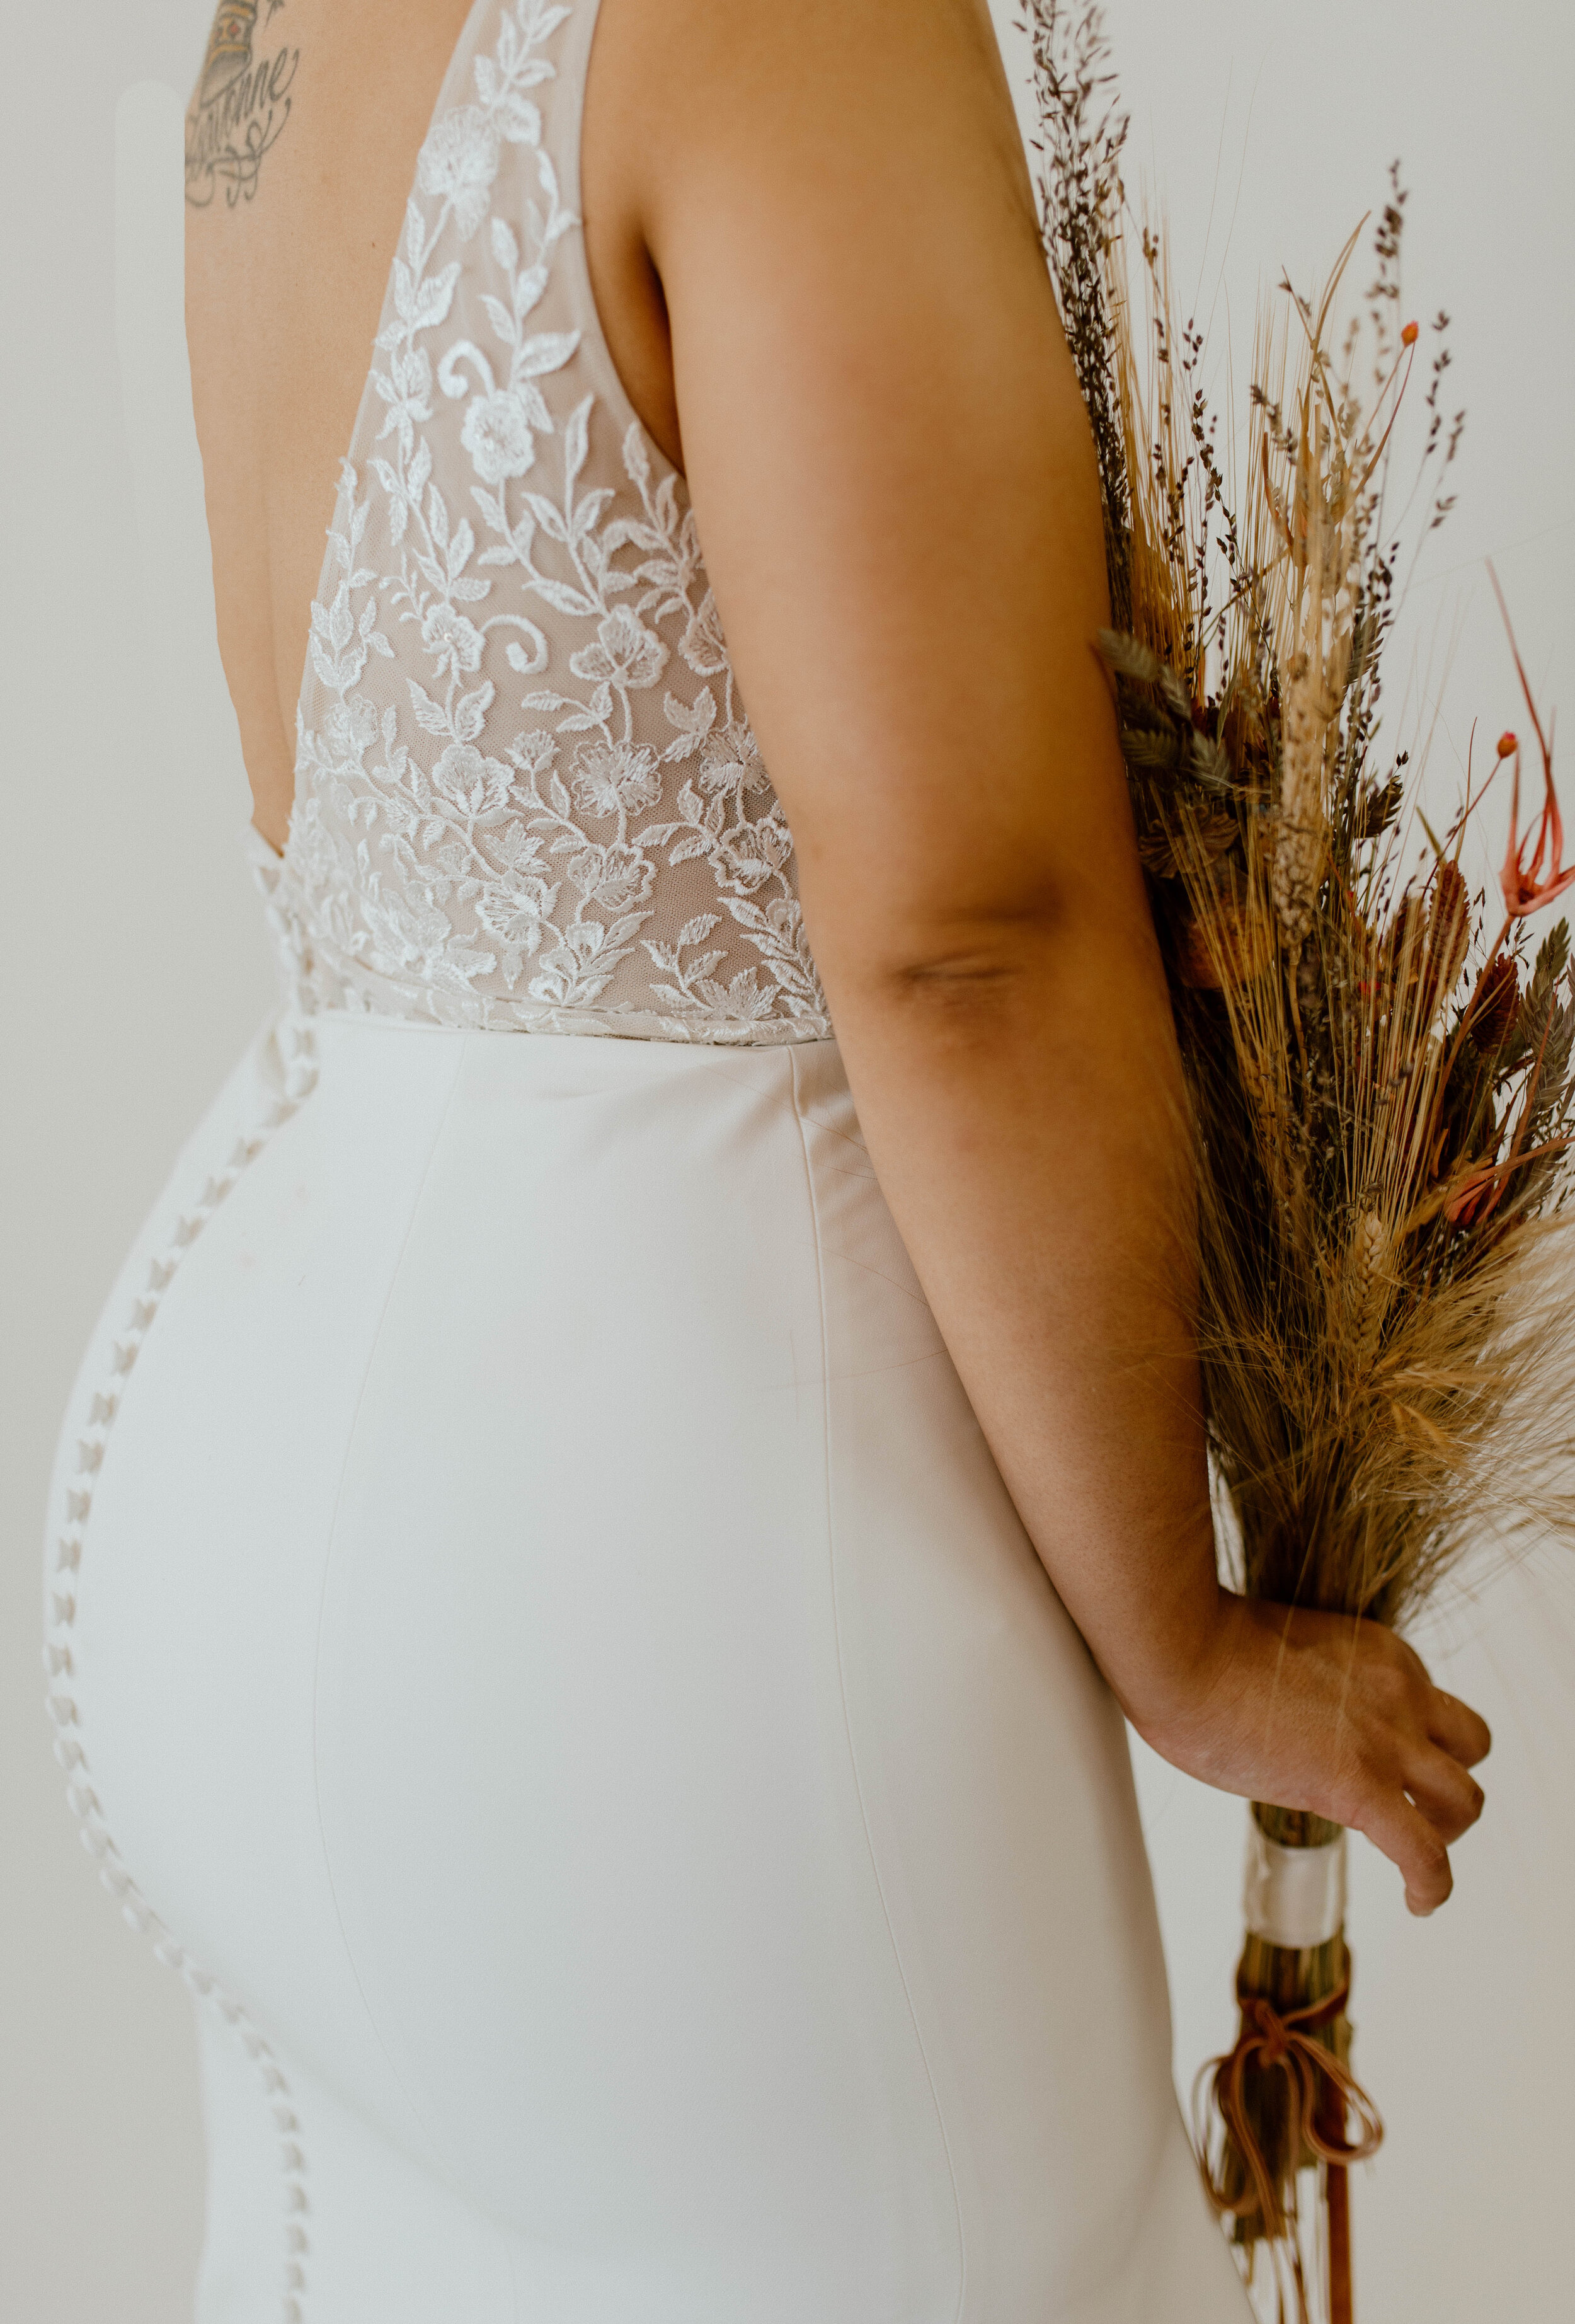  Arthouse Sacramento styled wedding shoot in Jenny Yoo Marnie, Callahan, and Harlow wedding dresses photographed by Eden B. Photography 